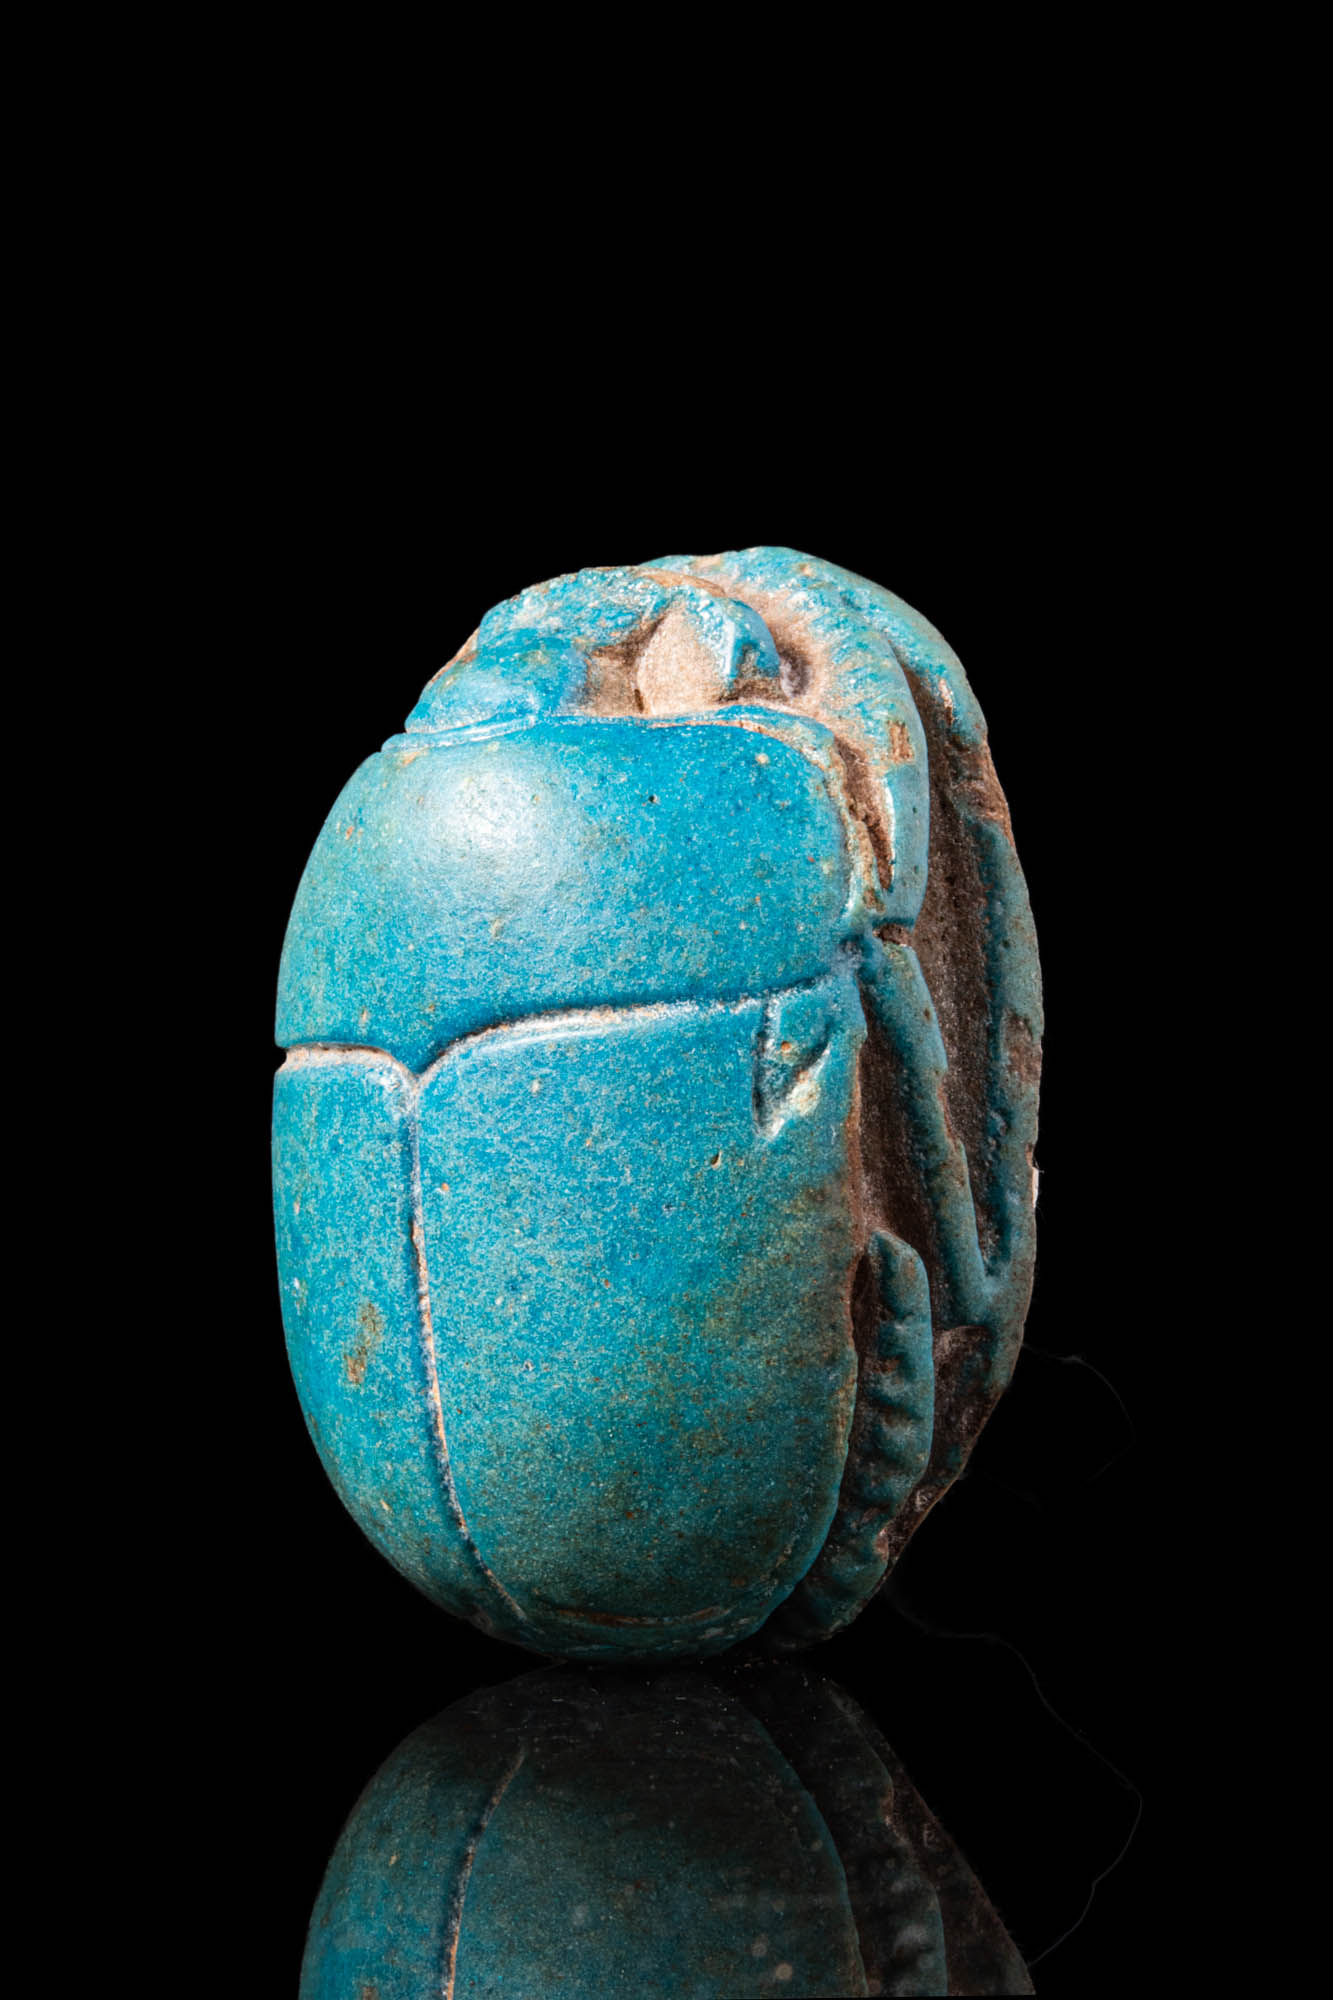 HUGE EGYPTIAN FAIENCE SCARAB WITH CARTOUCHE OF TUT - ANCH - AMON - Image 3 of 4